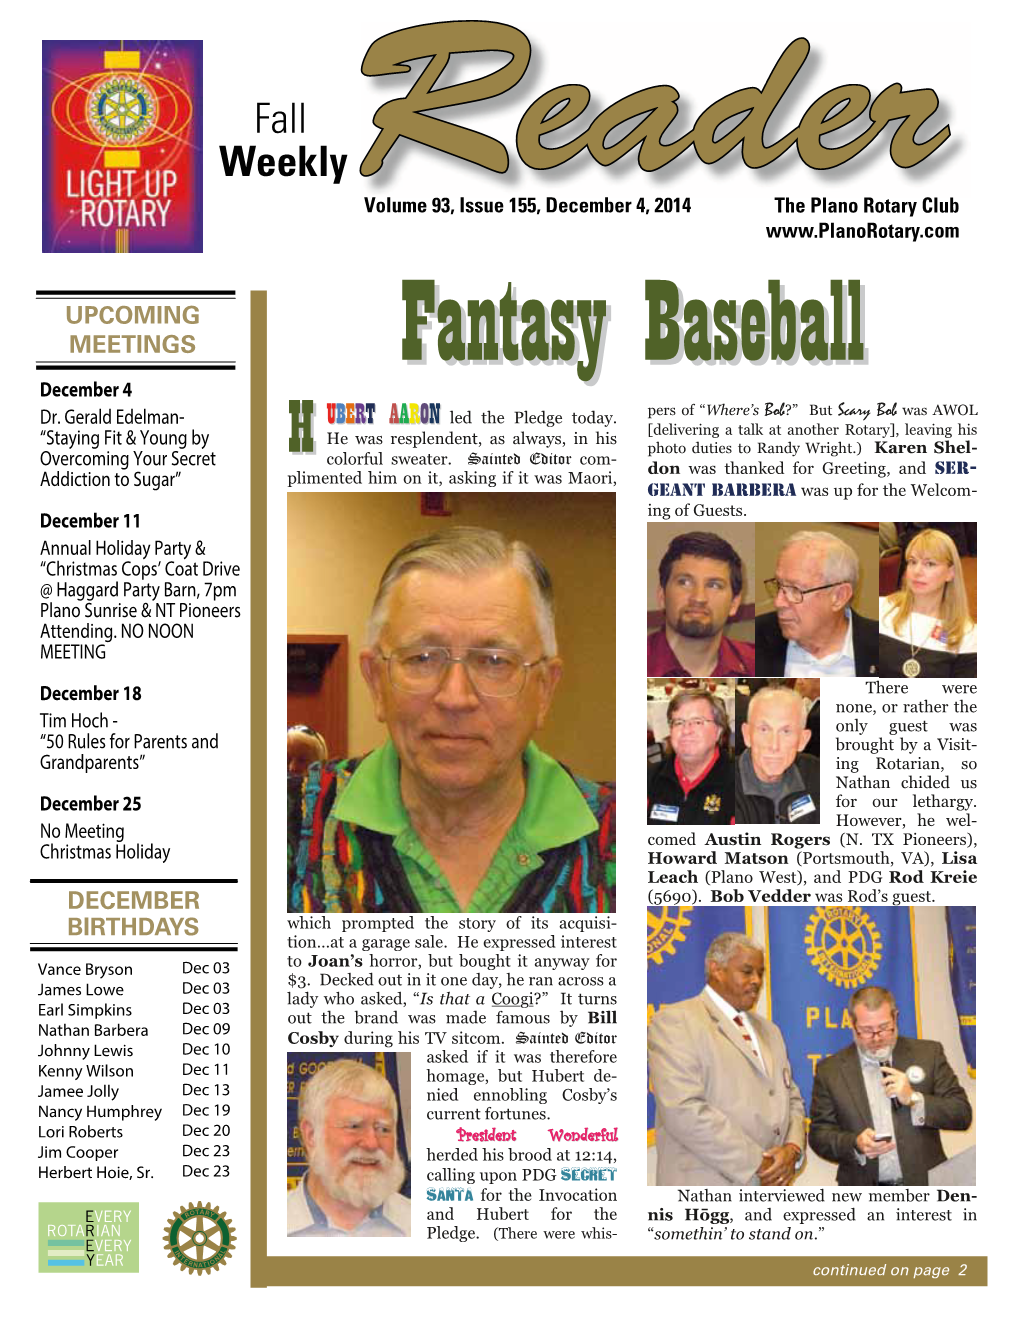 Fall Weekly Readervolume 93, Issue 155, December 4, 2014 the Plano Rotary Club